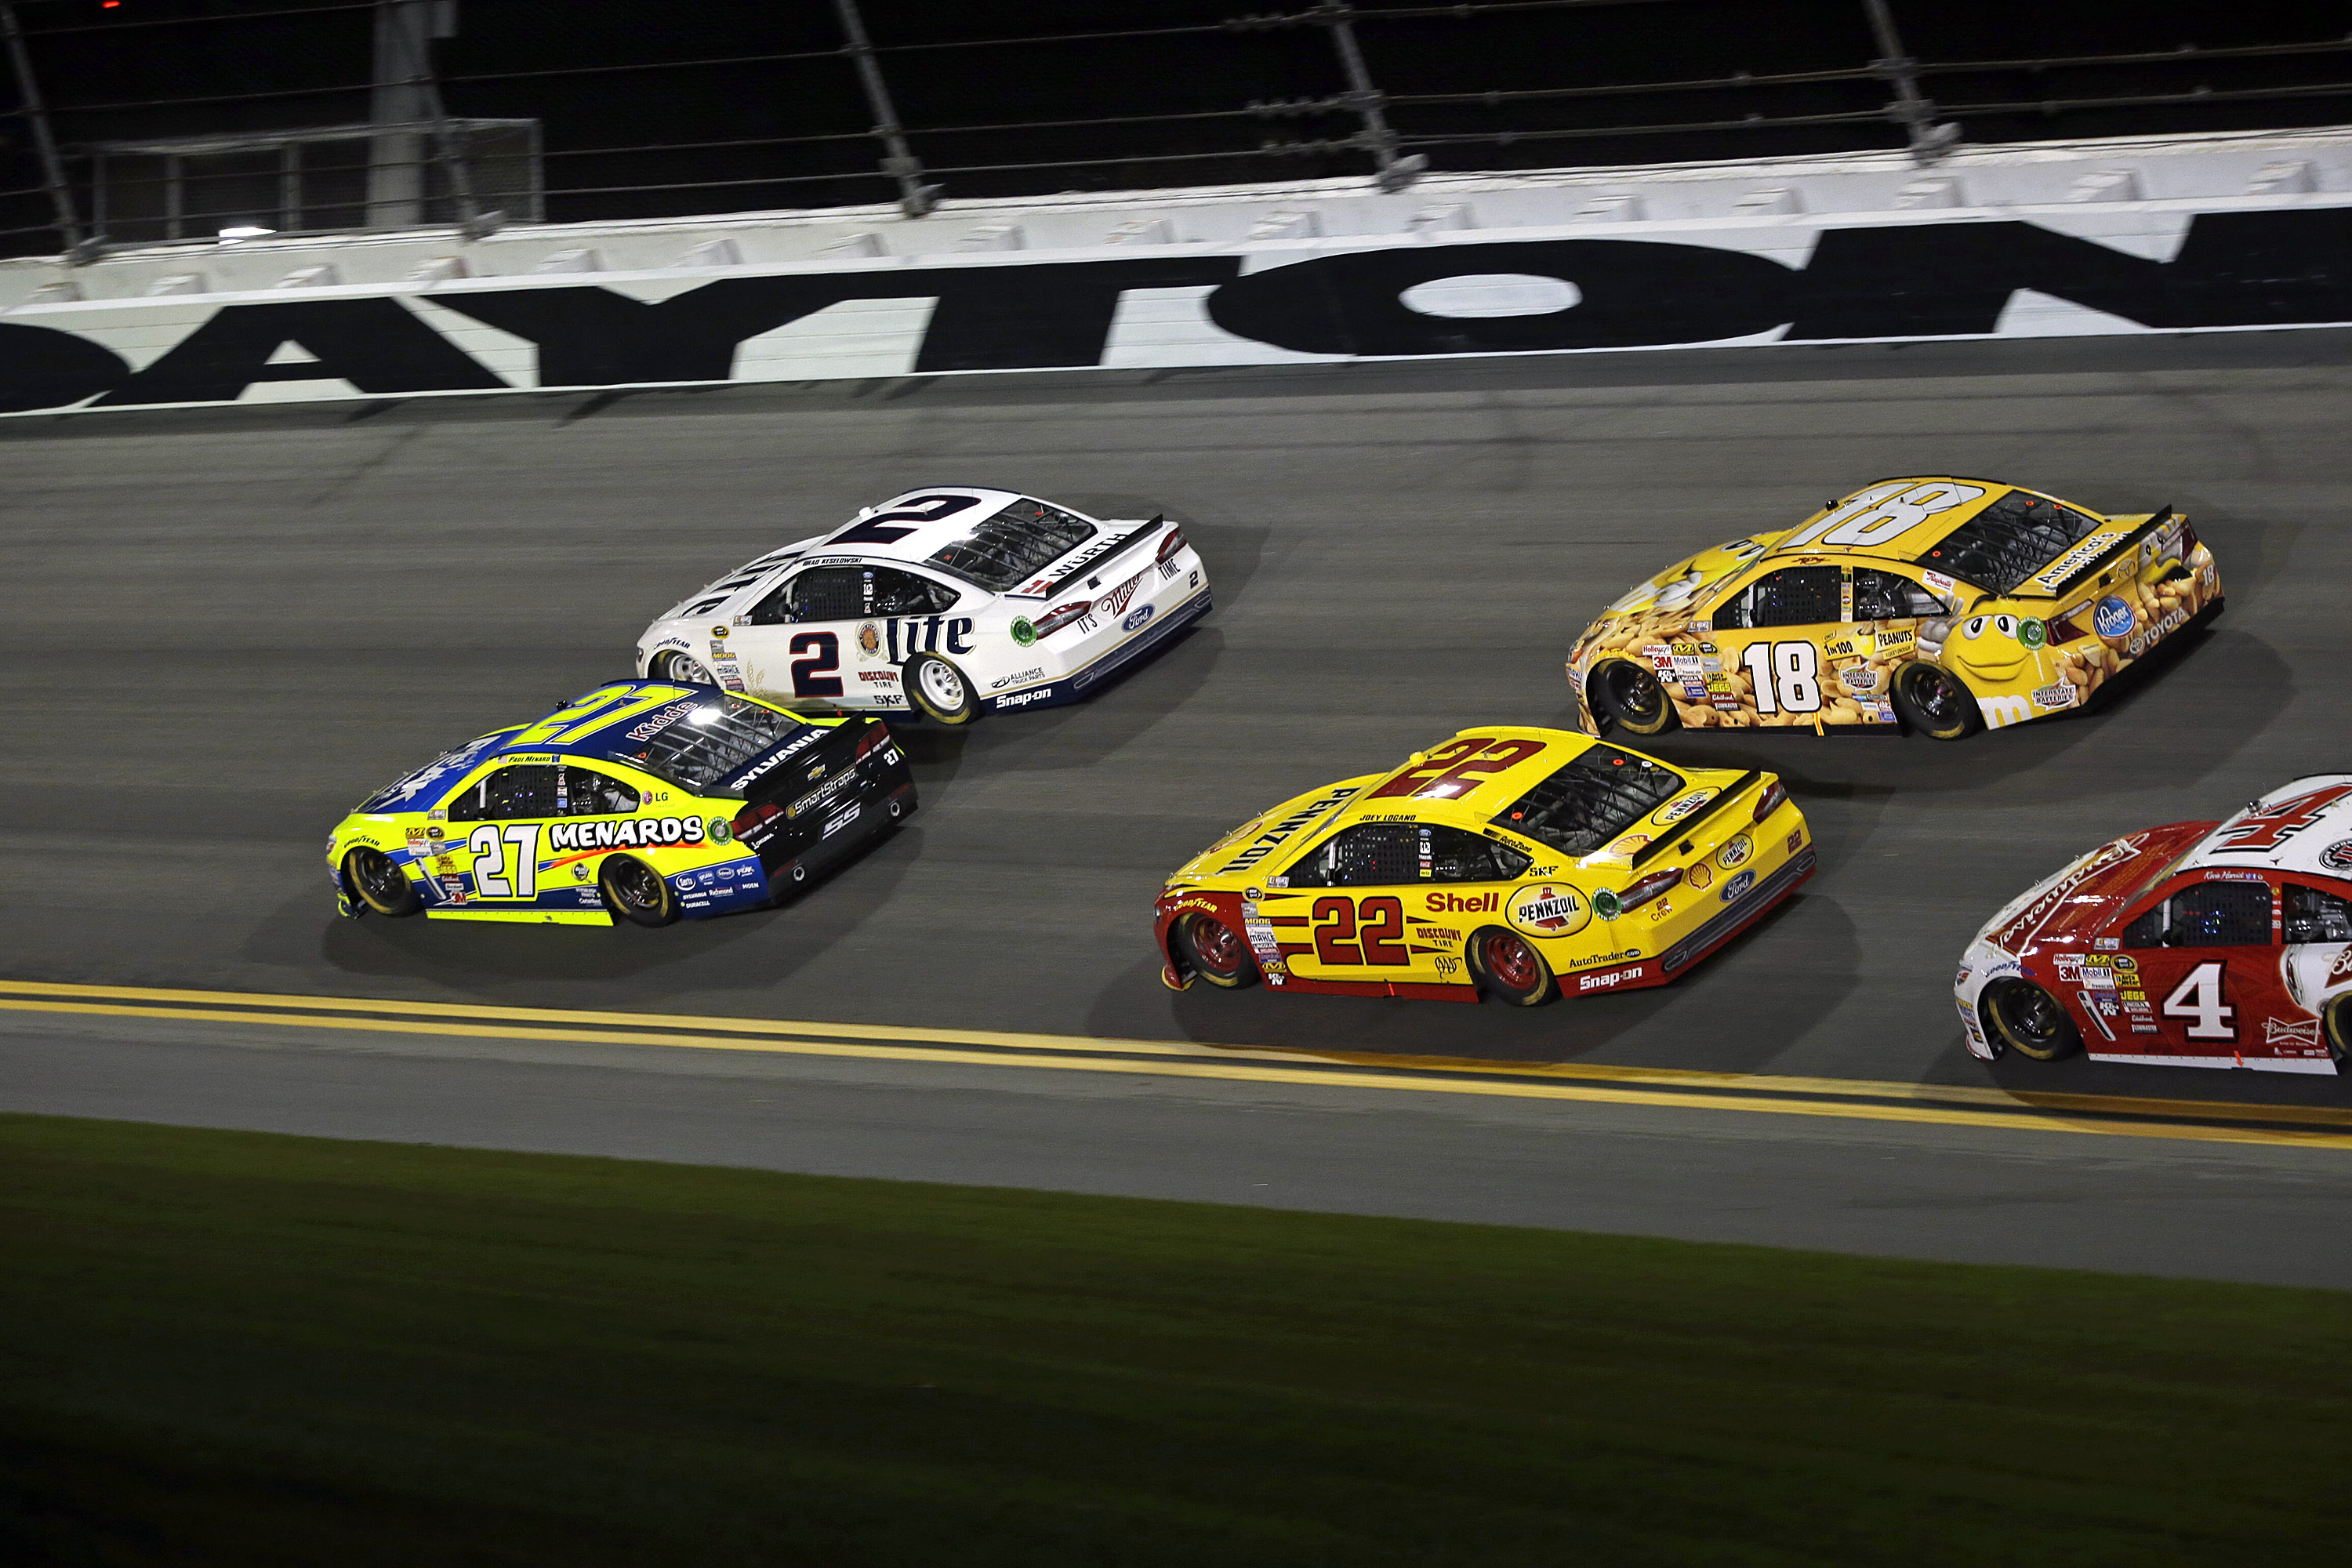 There was no shortage of aggressive racing on Sunday night at Daytona, as 18 drivers led at least one lap and there were 42 lead changes over the course of the race.